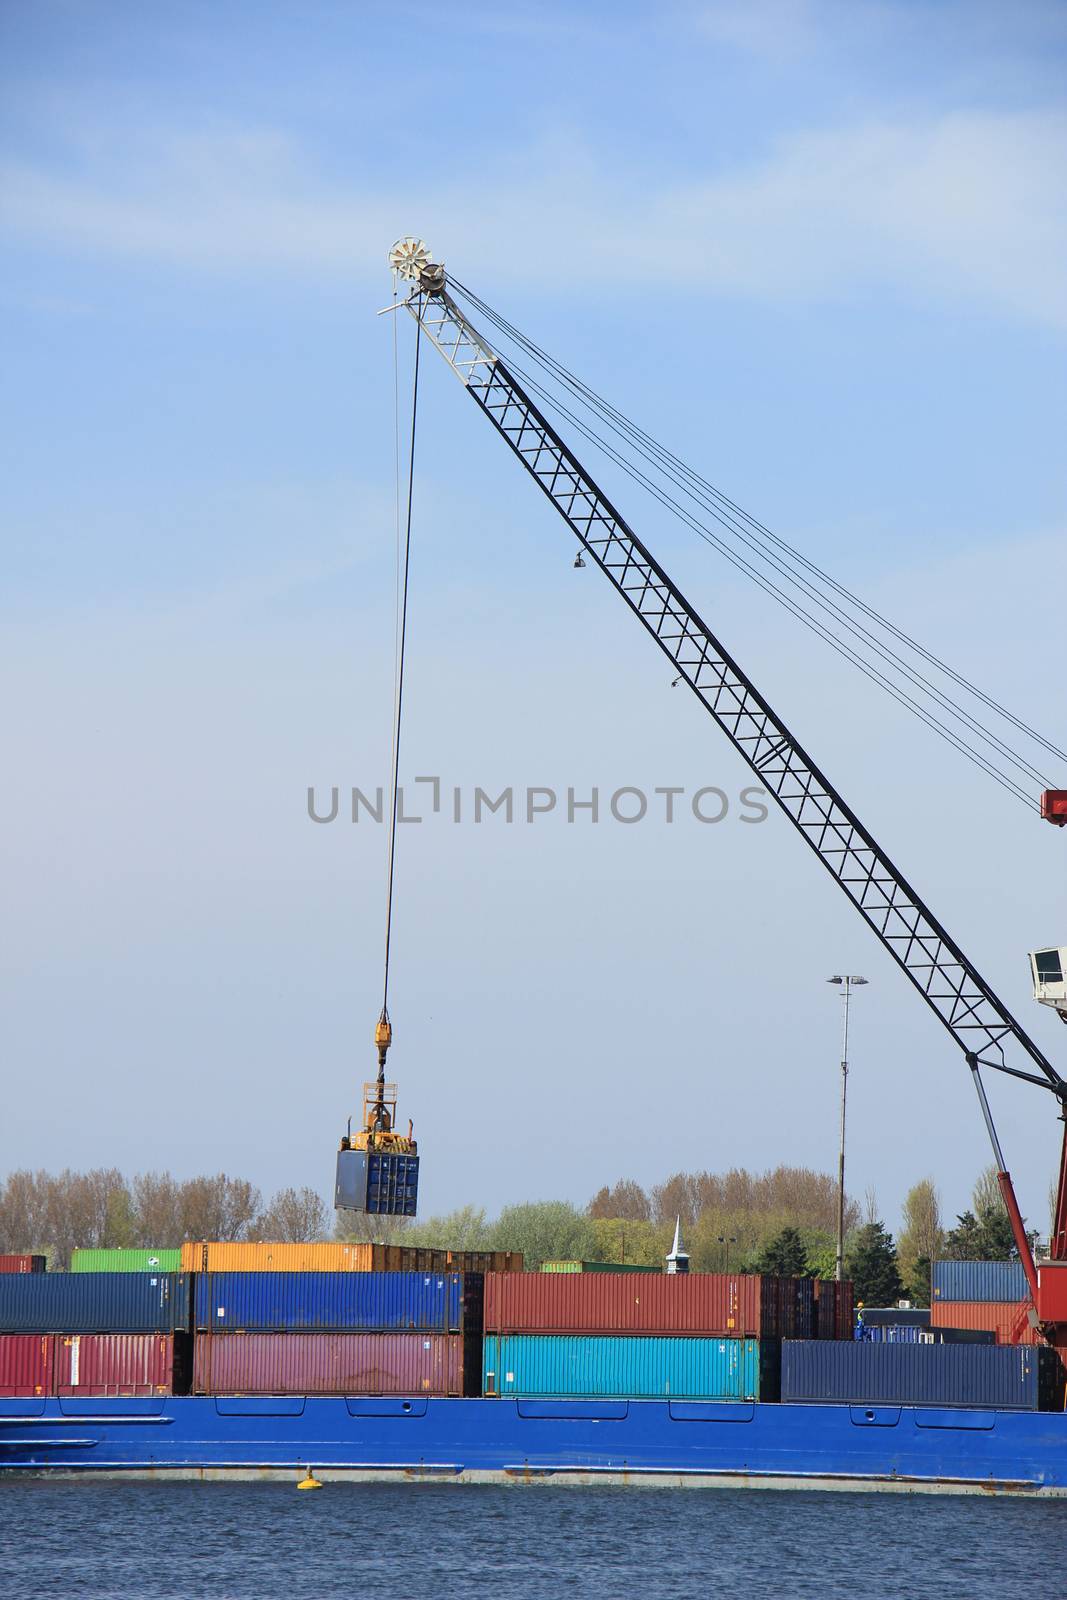 Intermodal containers on a ship, various colors